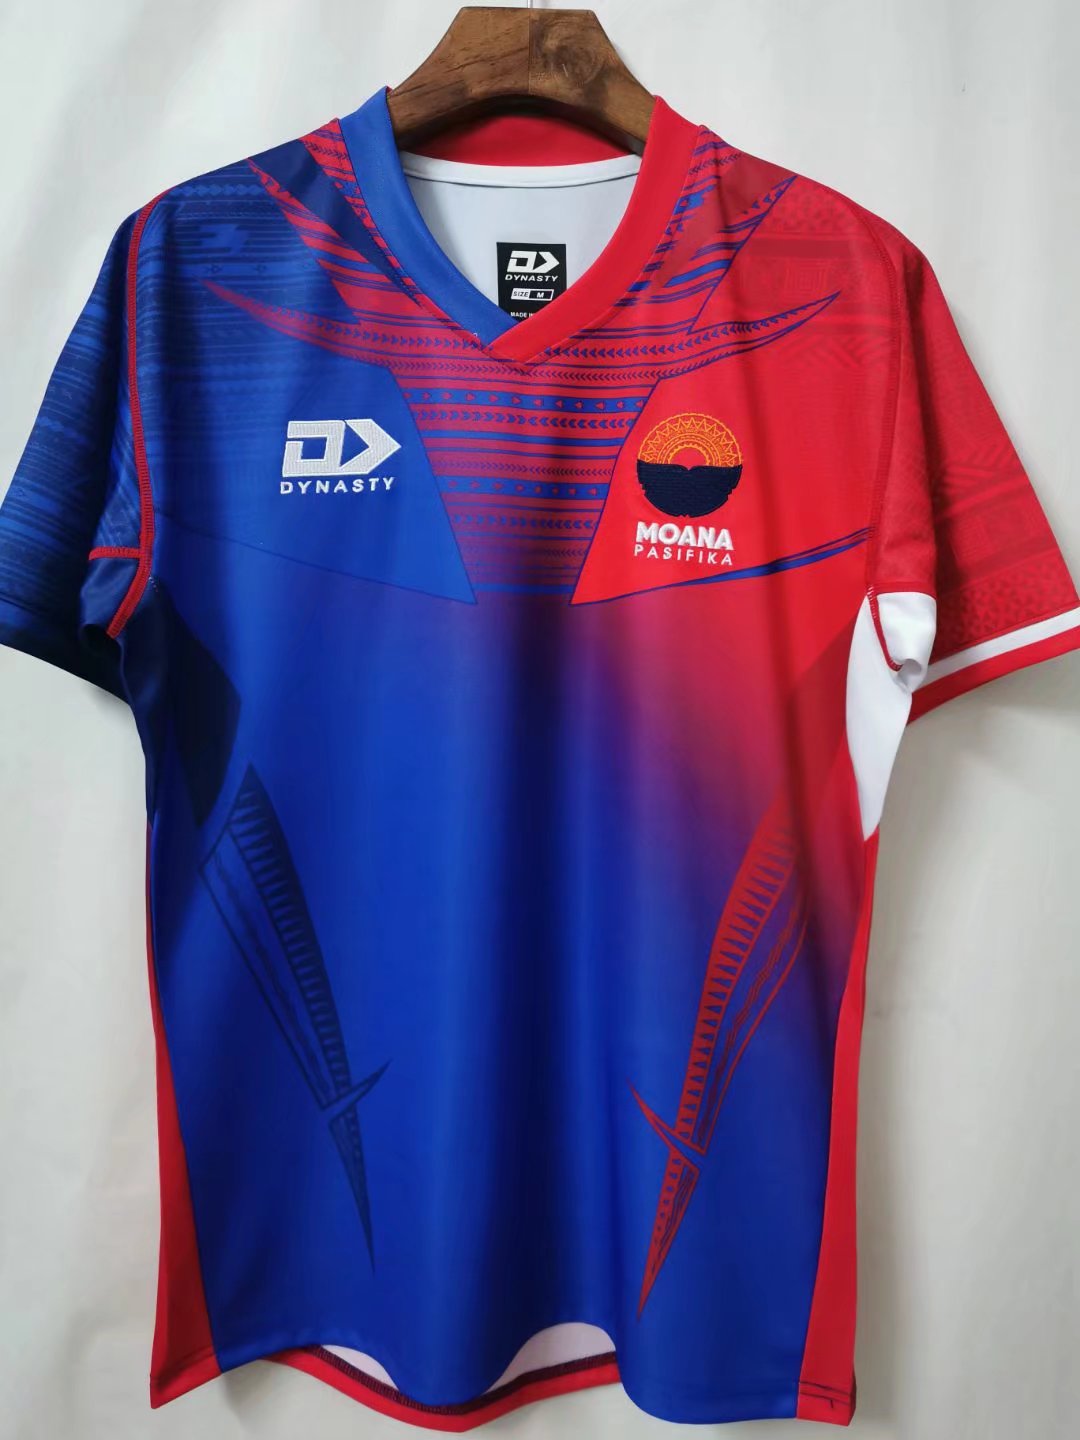 2021/22 New Zealand Moana Red & Blue Thailand Rugby Shirts-805